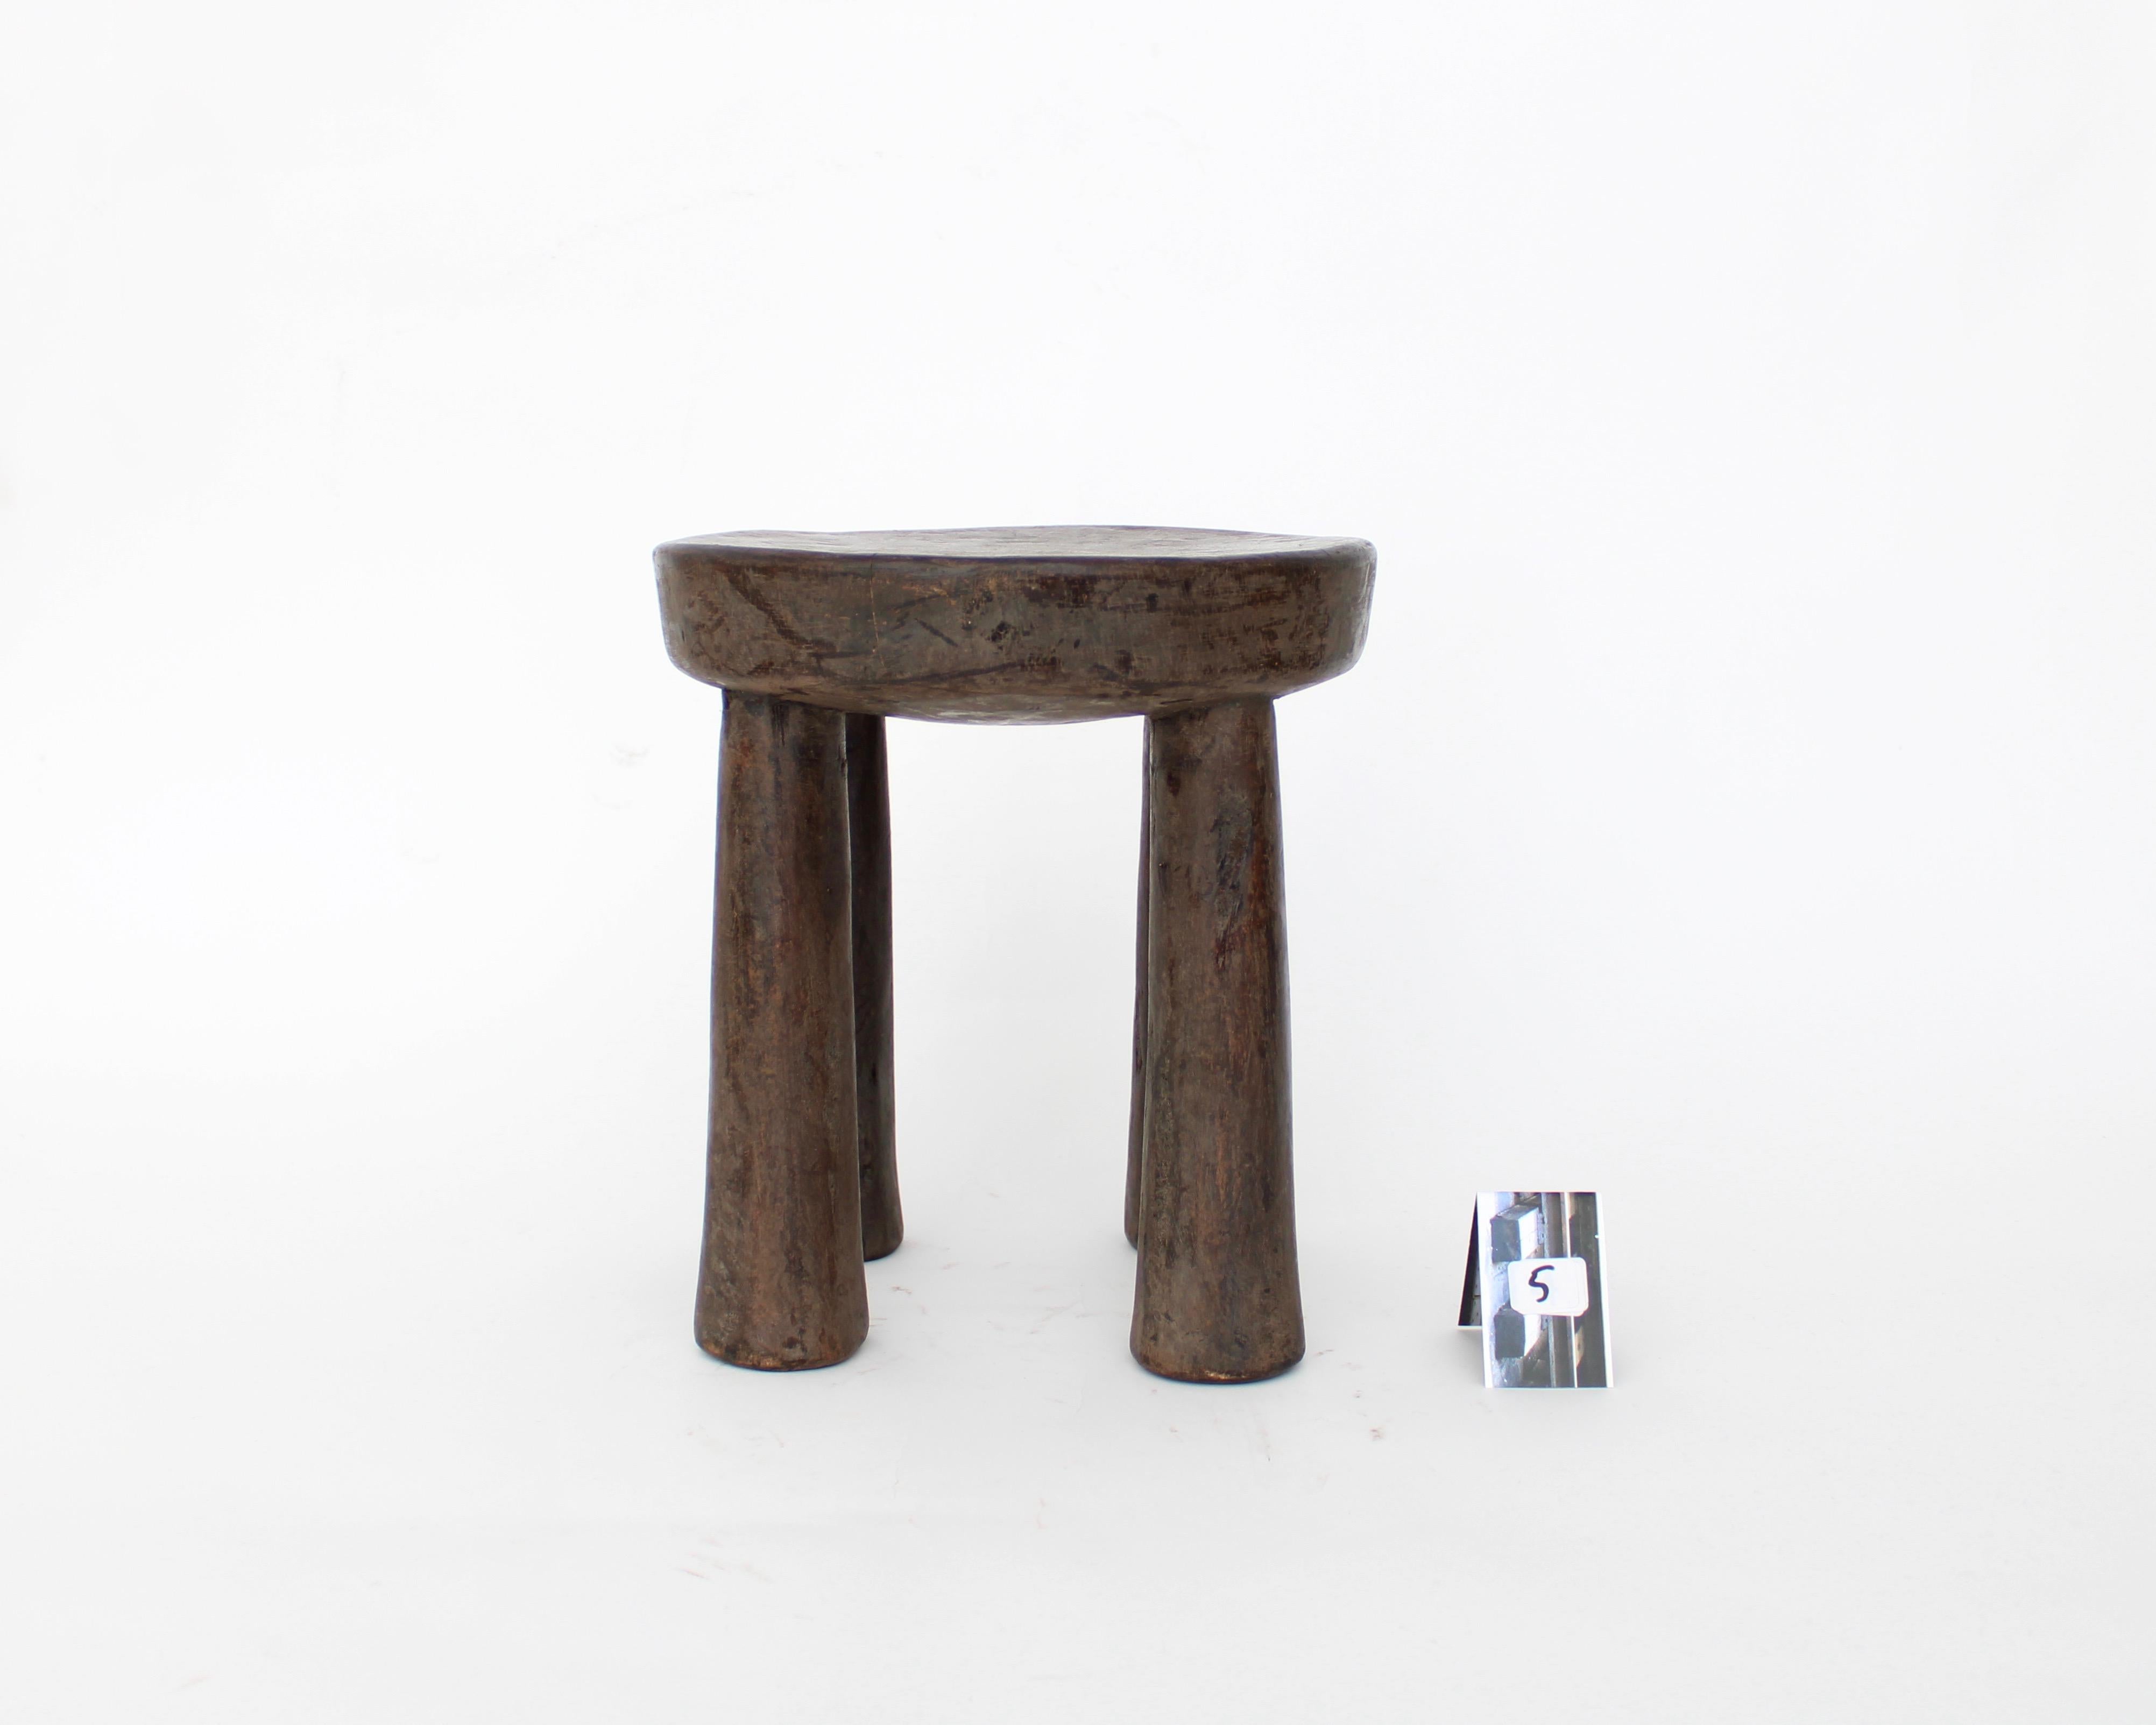 This African Lobi stool was created by the Lobi People of Ghana. It was carved from single blocks of wood, and has a wonderfully simple form. It has aged beautifully by use and exposure, and will bring history and authenticity into your space
The